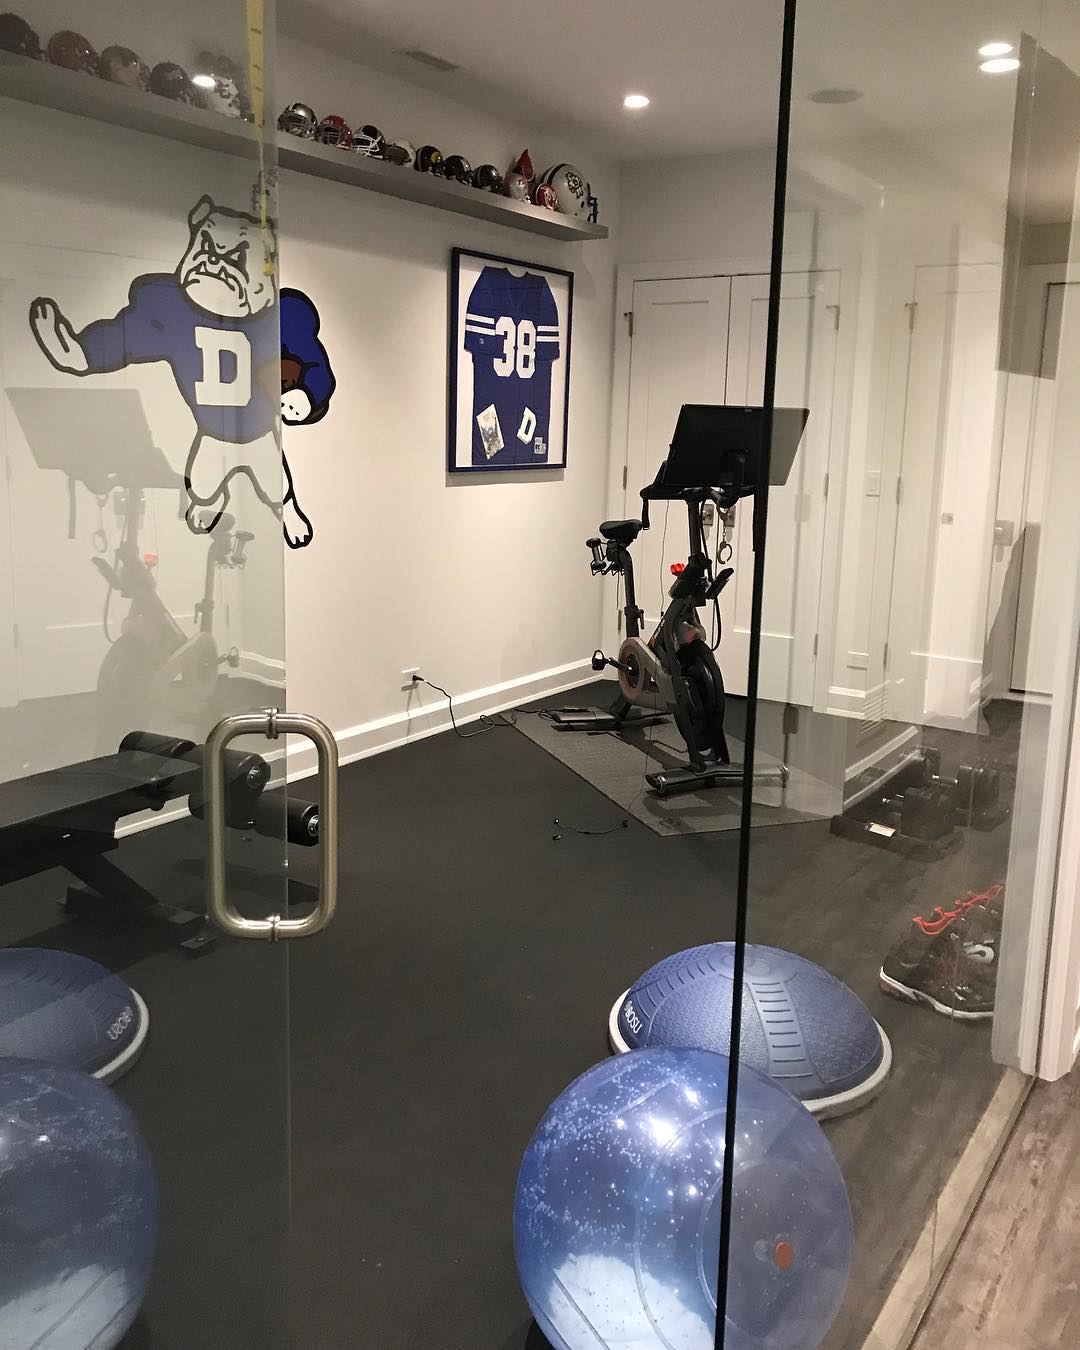 Fitness room in home decked out with Drake University wall decor. Photo by Instagram user @jamieschachteldesign